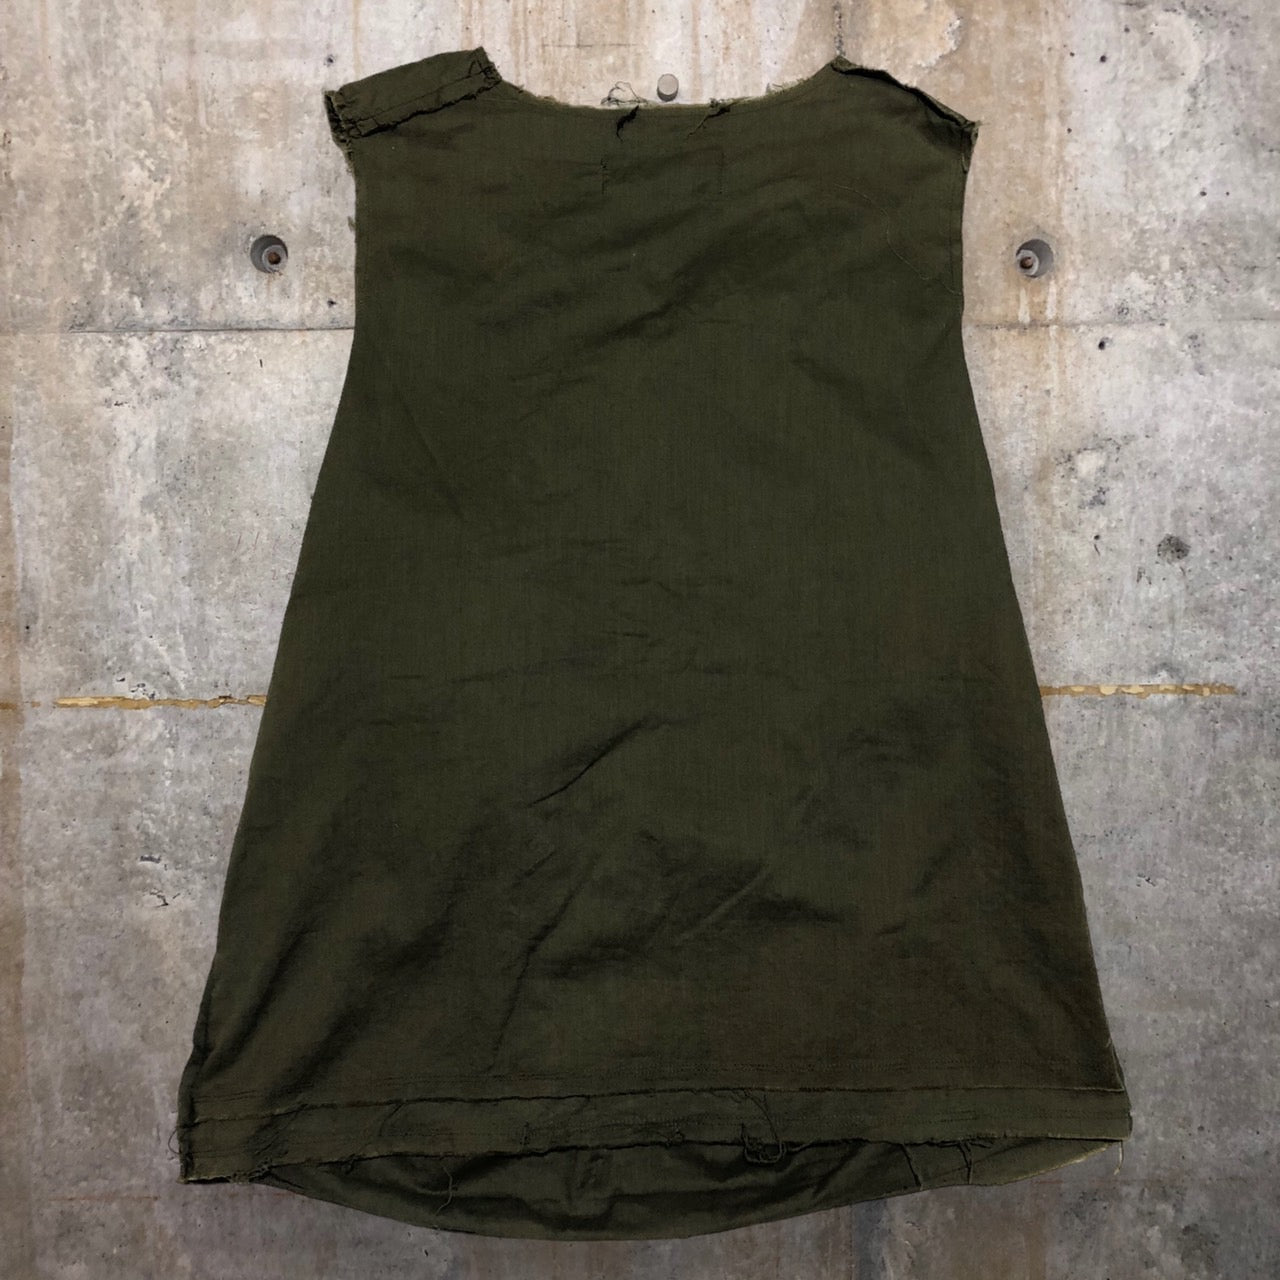 tricot COMME des GARCONS(トリココムデギャルソン) 03SS gathered sleeveless blouse ギャザーノースリーブ ブラウス TI-B004 SIZE M カーキ AD2002